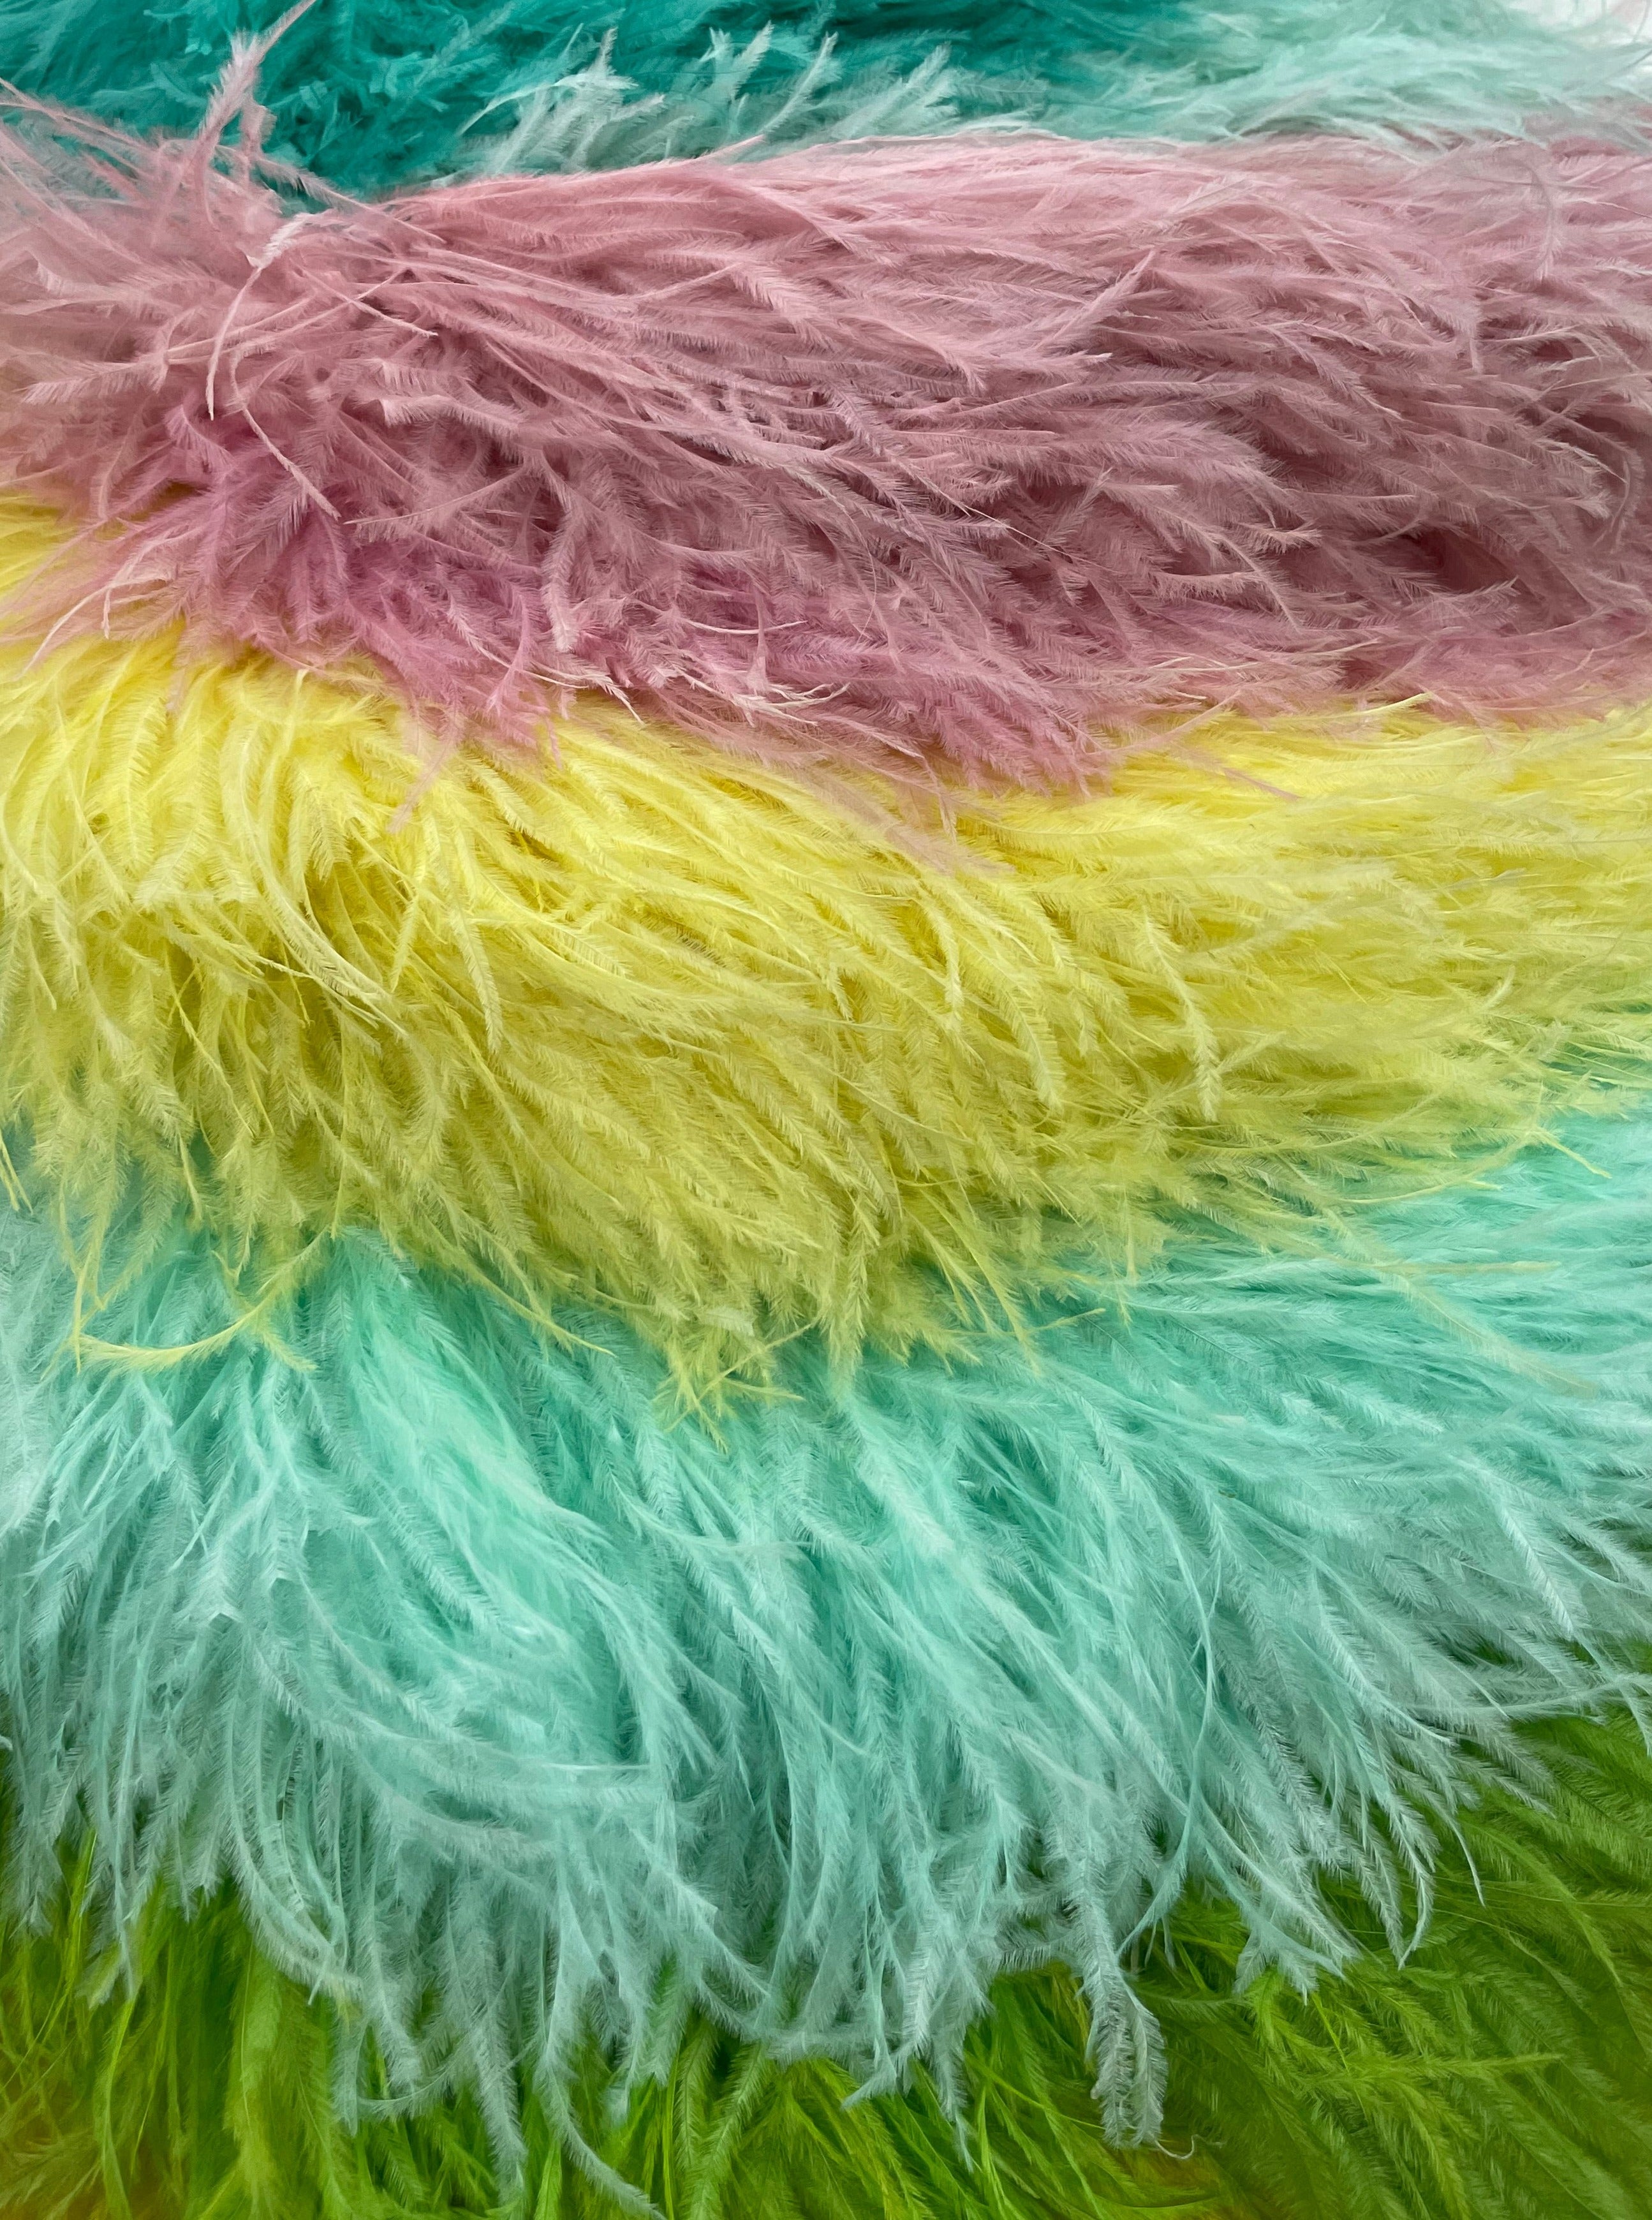 Ostrich Feather Fringe (2-ply)